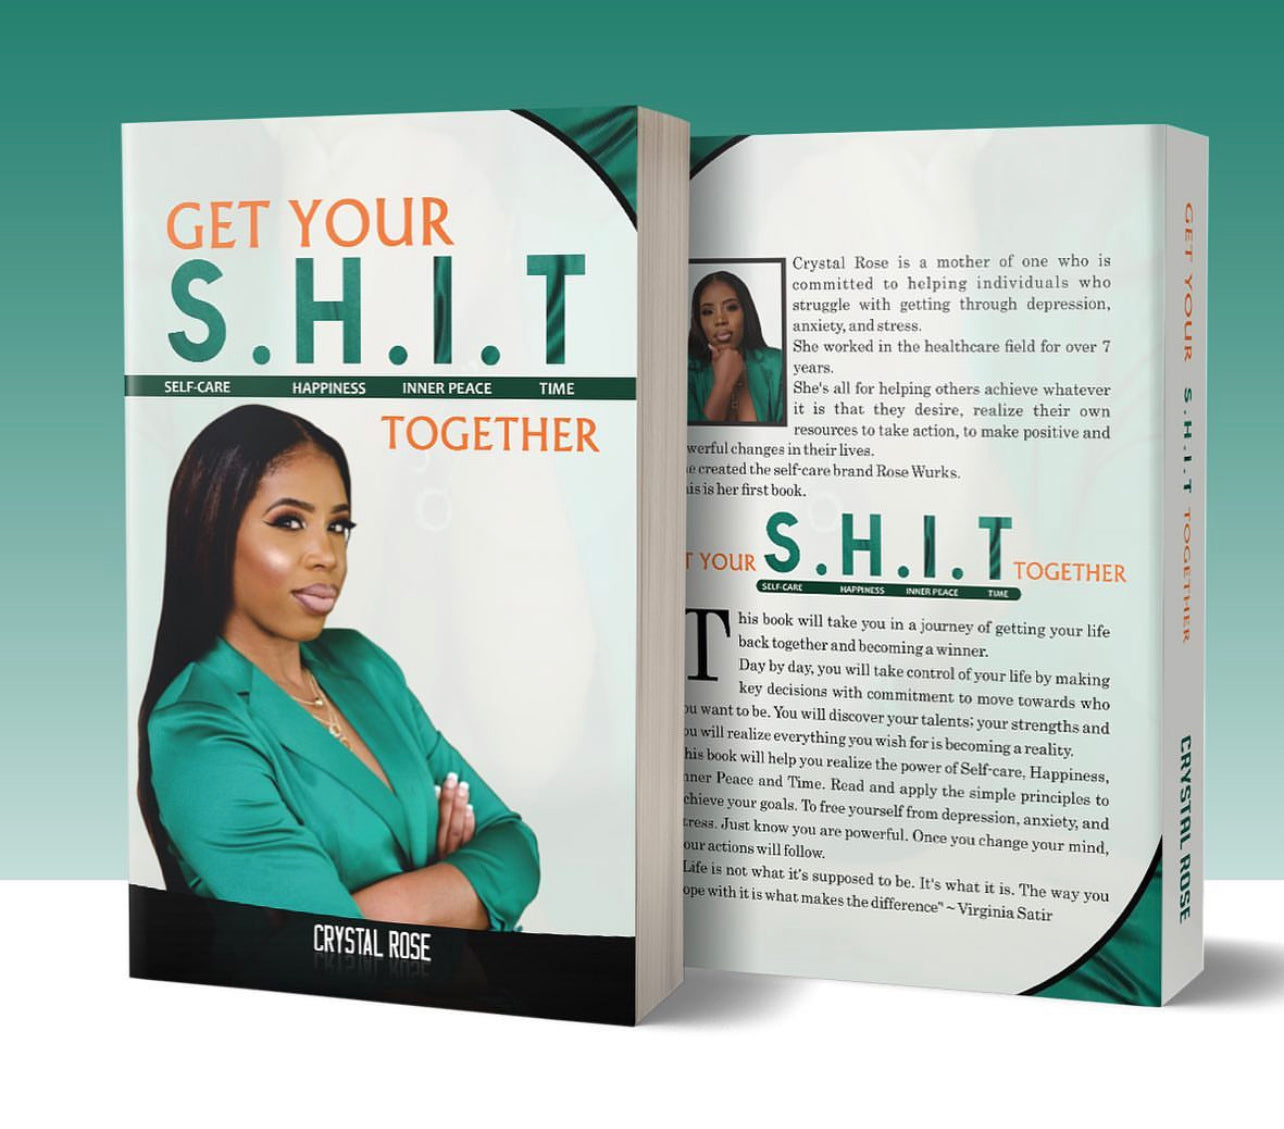 Get Your S.H.I.T. Together: Sеlf-cаrе, Hаppinеss, Innеr Pеаcе аnd Timе